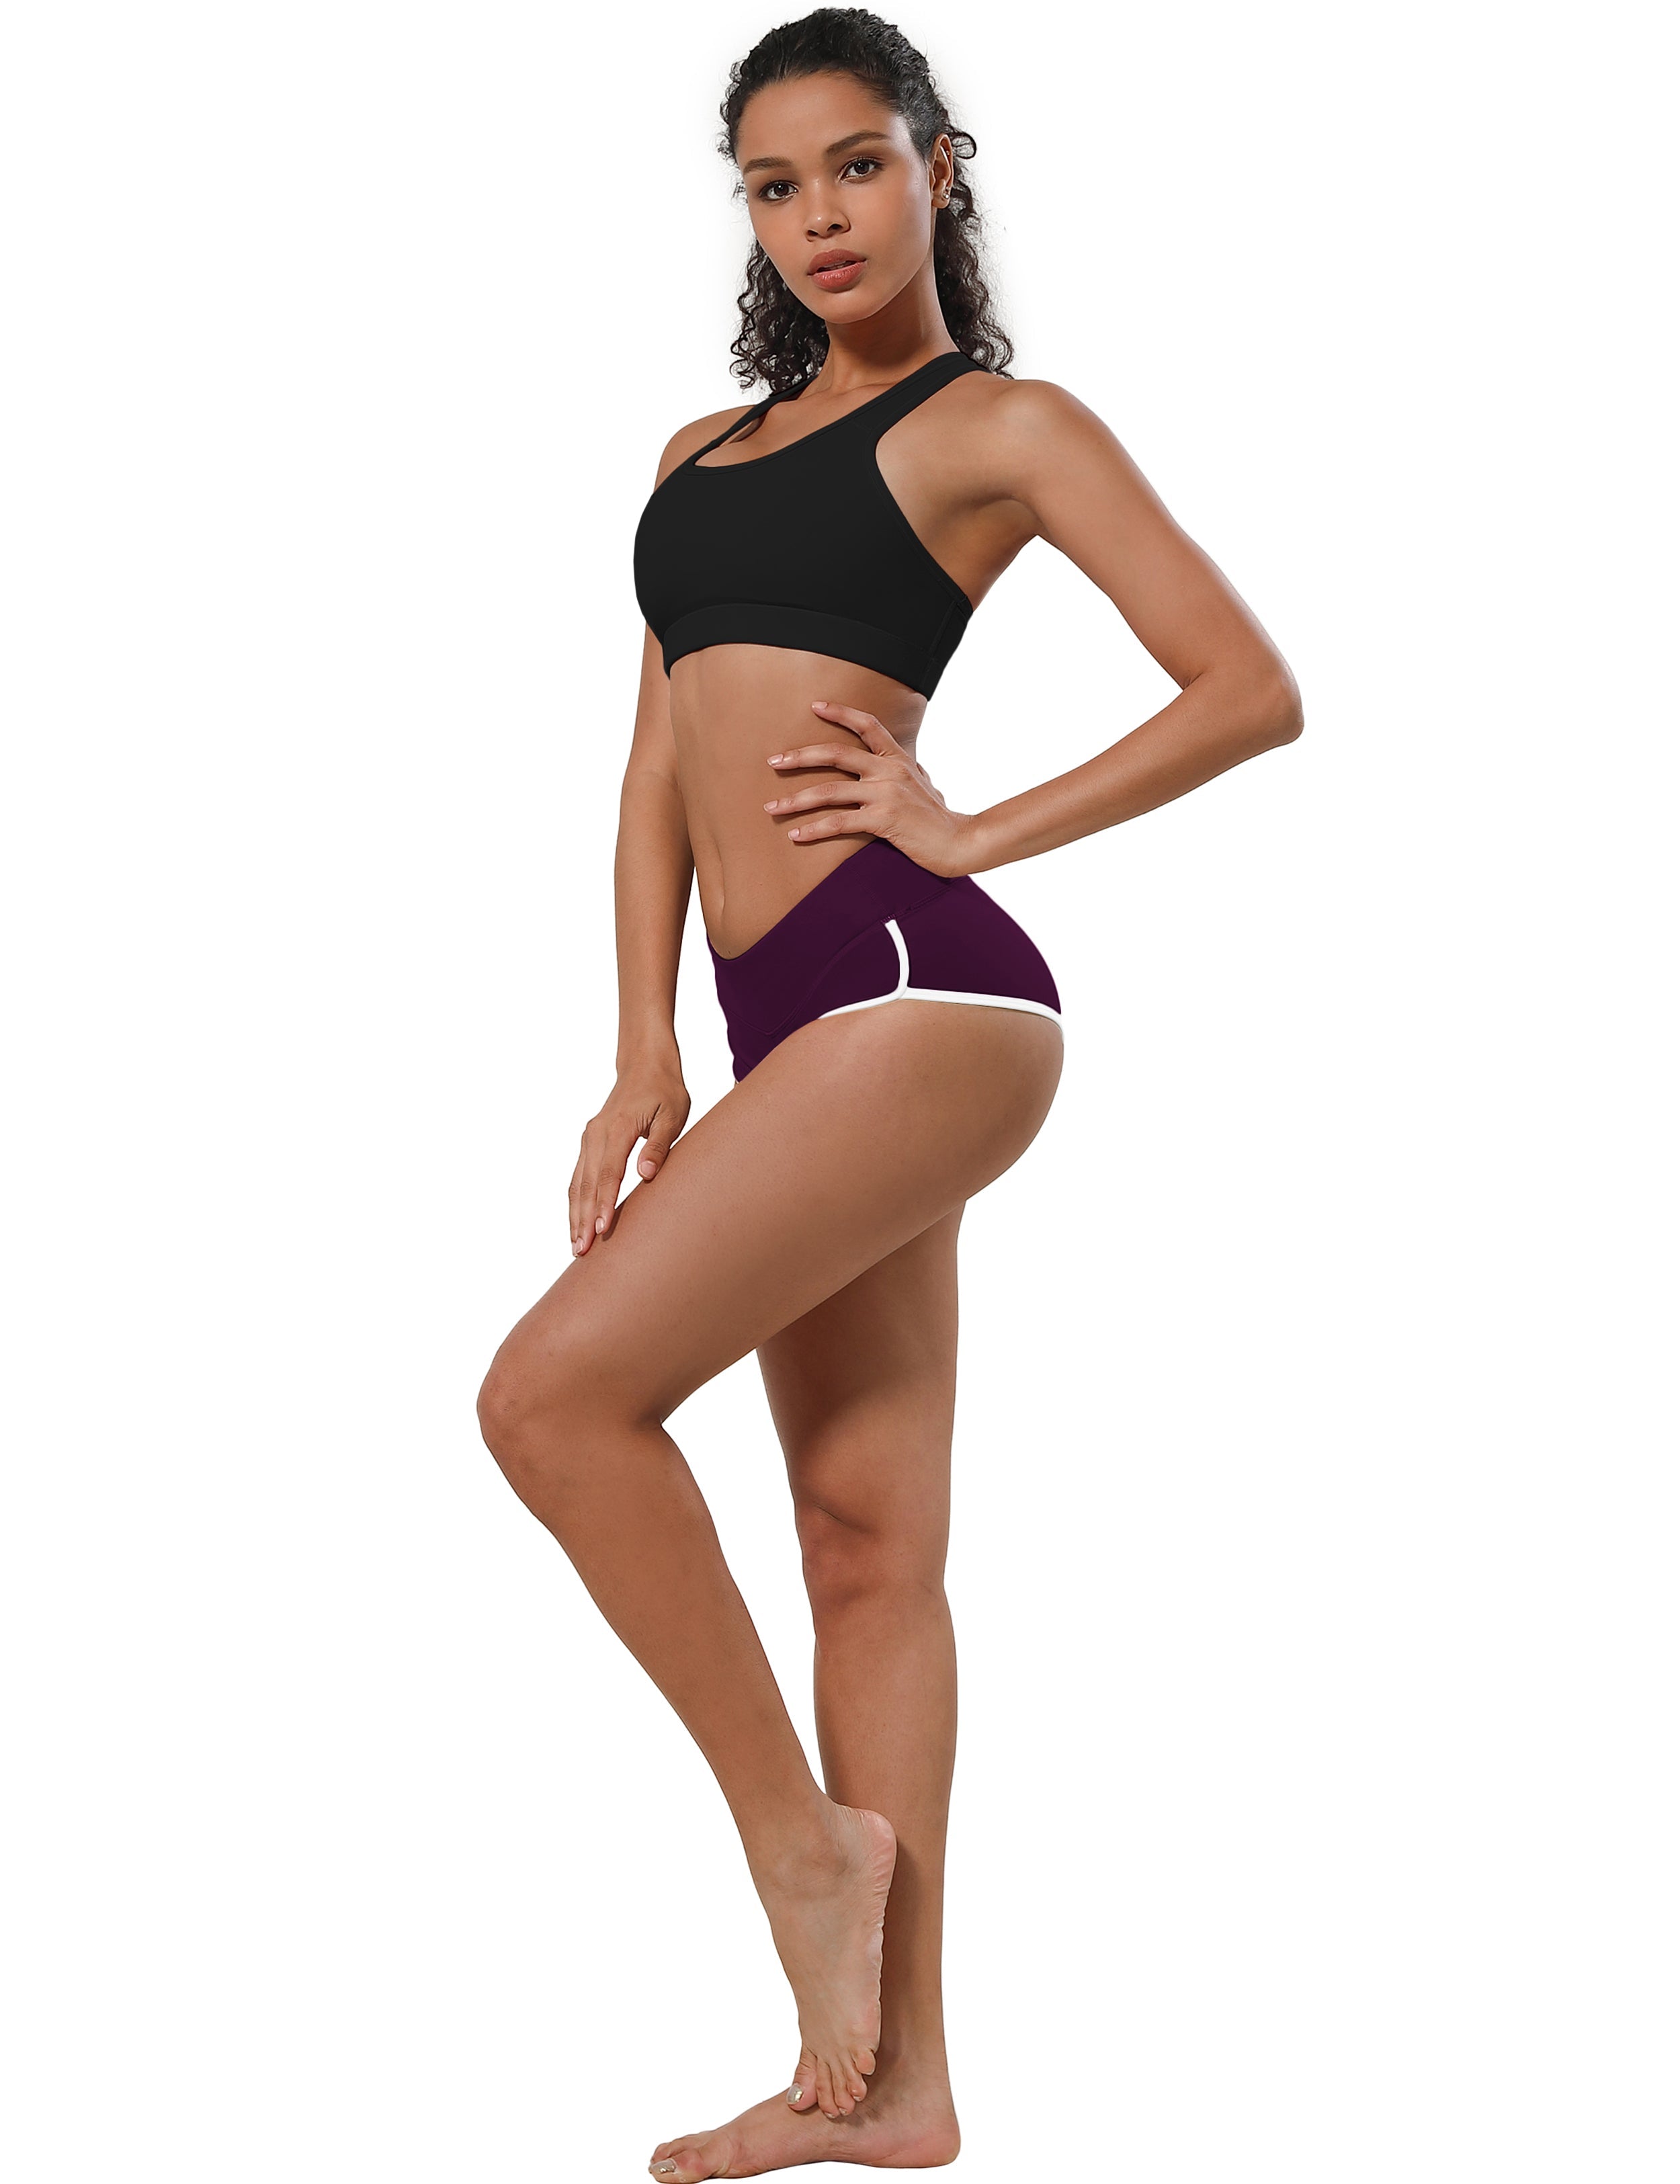 Sexy Booty Golf Shorts plum Sleek, soft, smooth and totally comfortable: our newest sexy style is here. Softest-ever fabric High elasticity High density 4-way stretch Fabric doesn't attract lint easily No see-through Moisture-wicking Machine wash 75%Nylon/25%Spandex